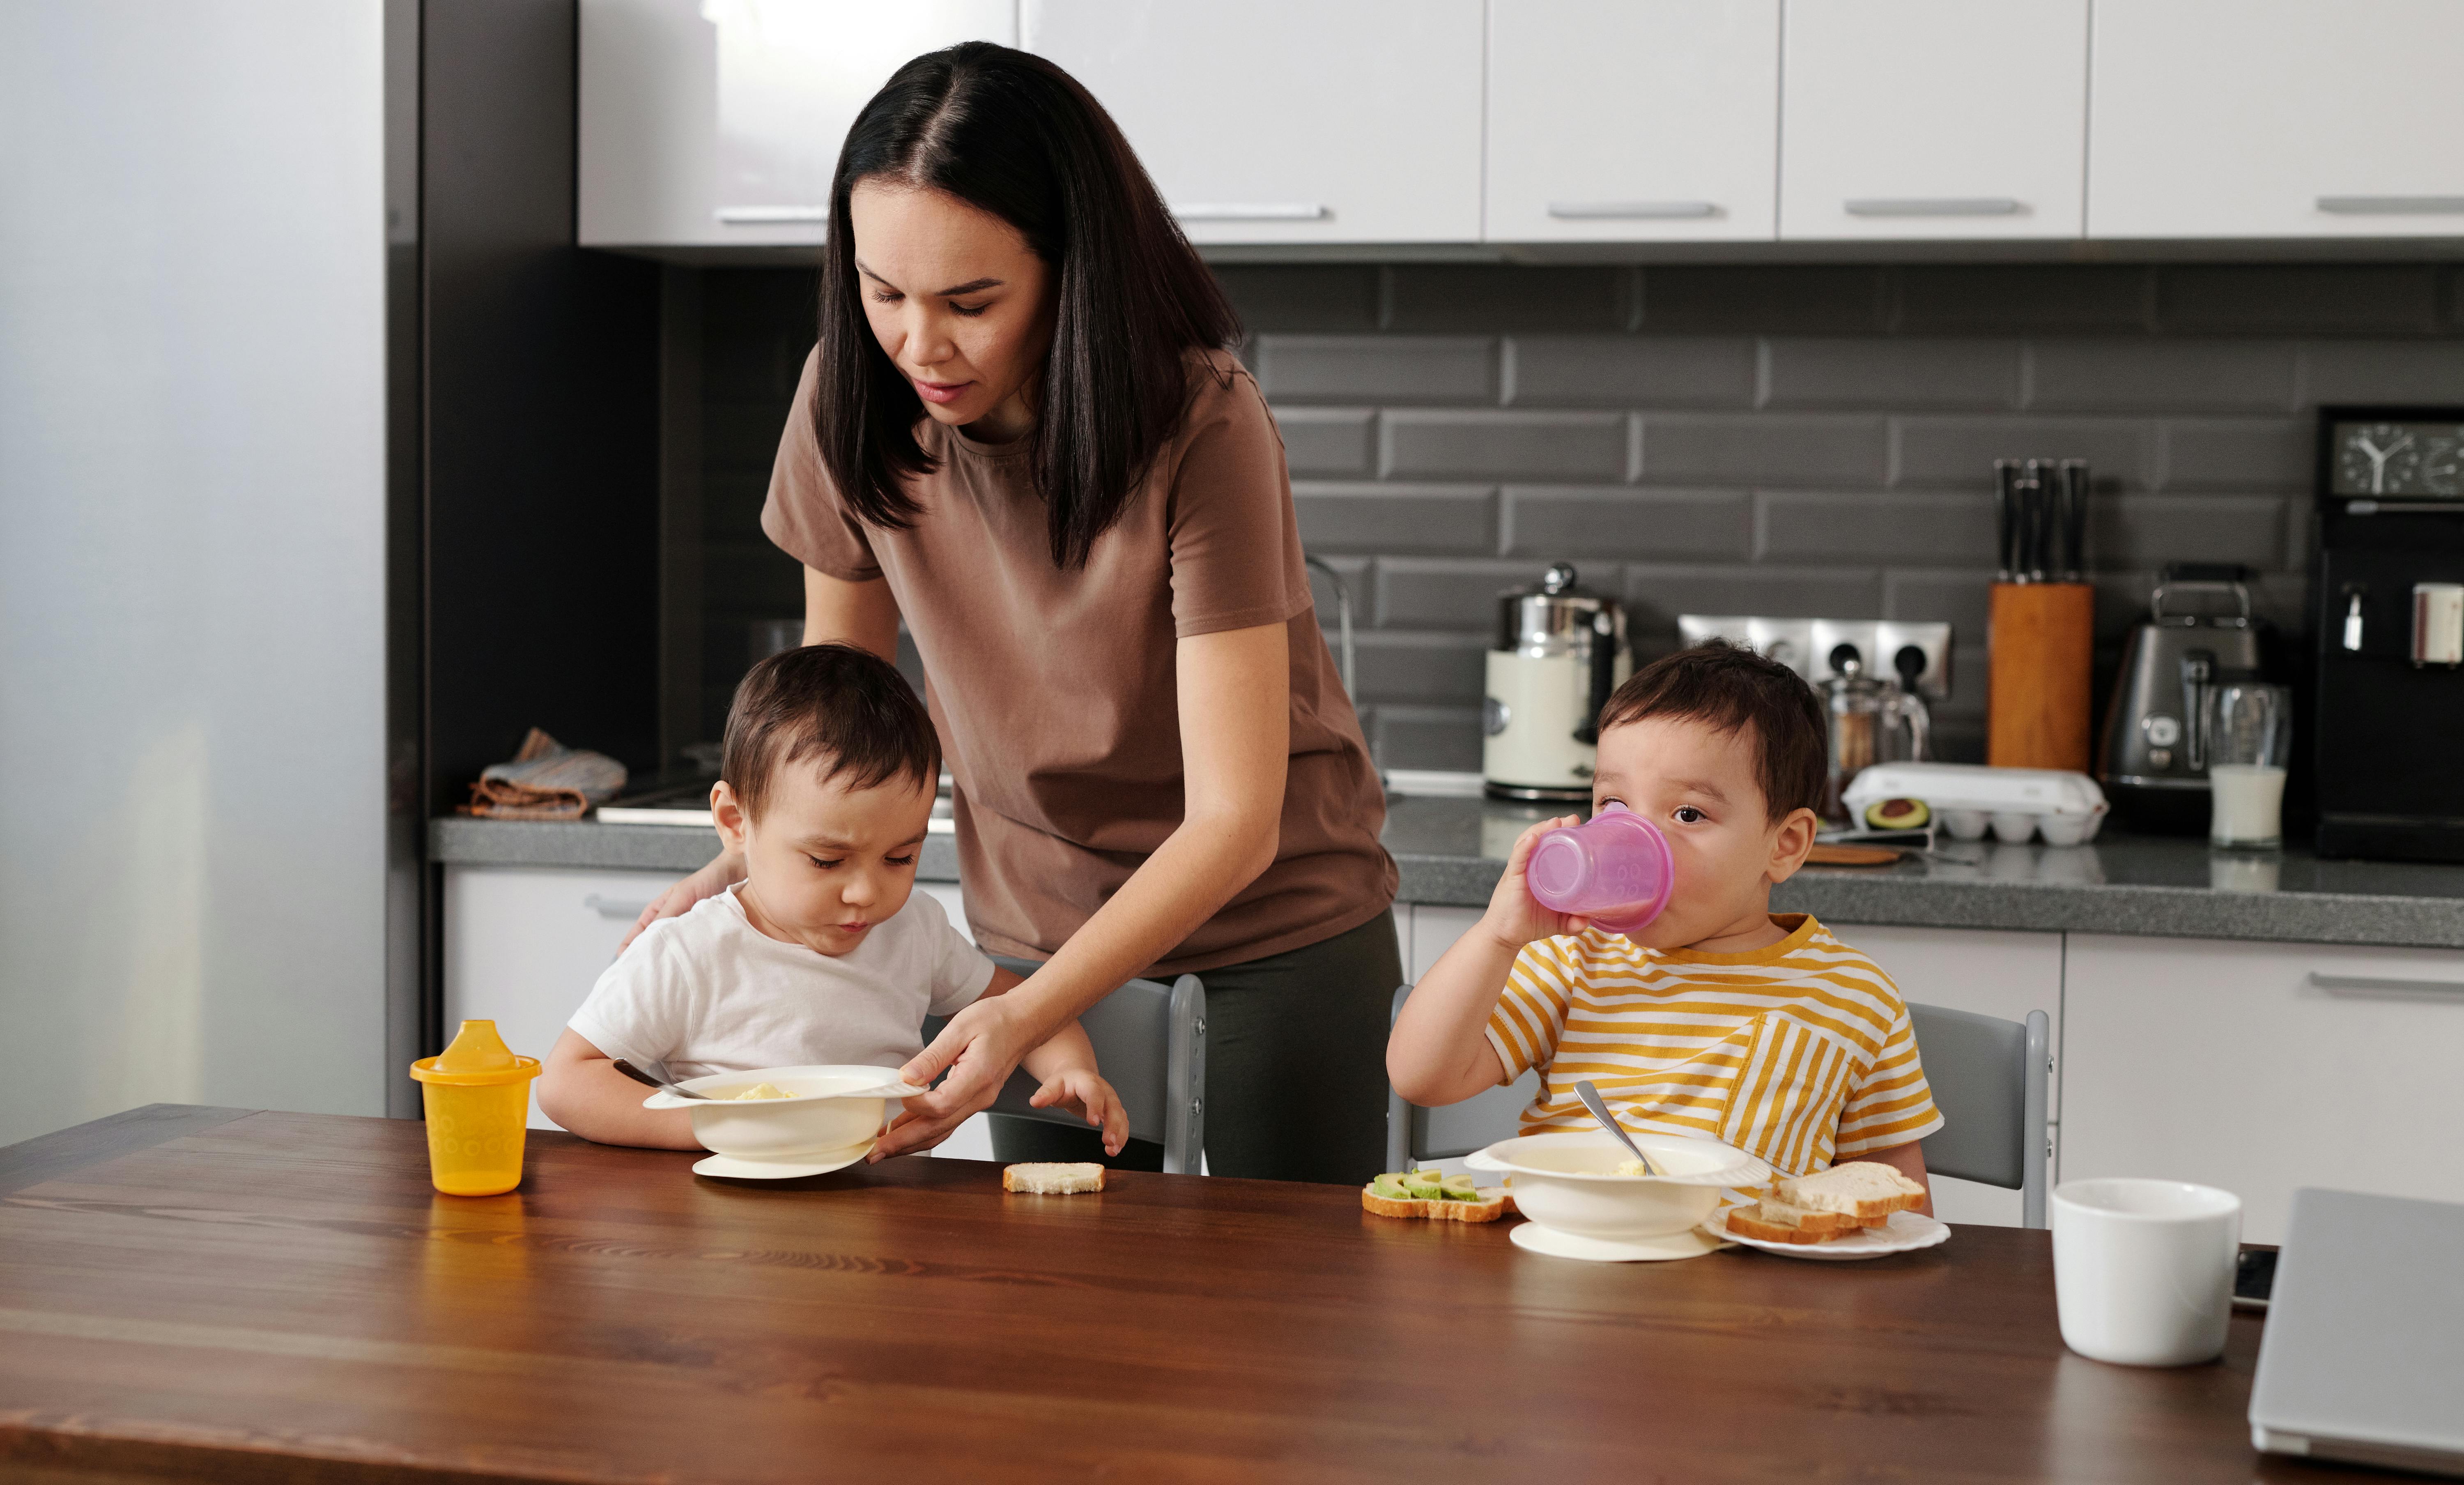 A woman taking care of the kids in the kitchen | Source: Pexels